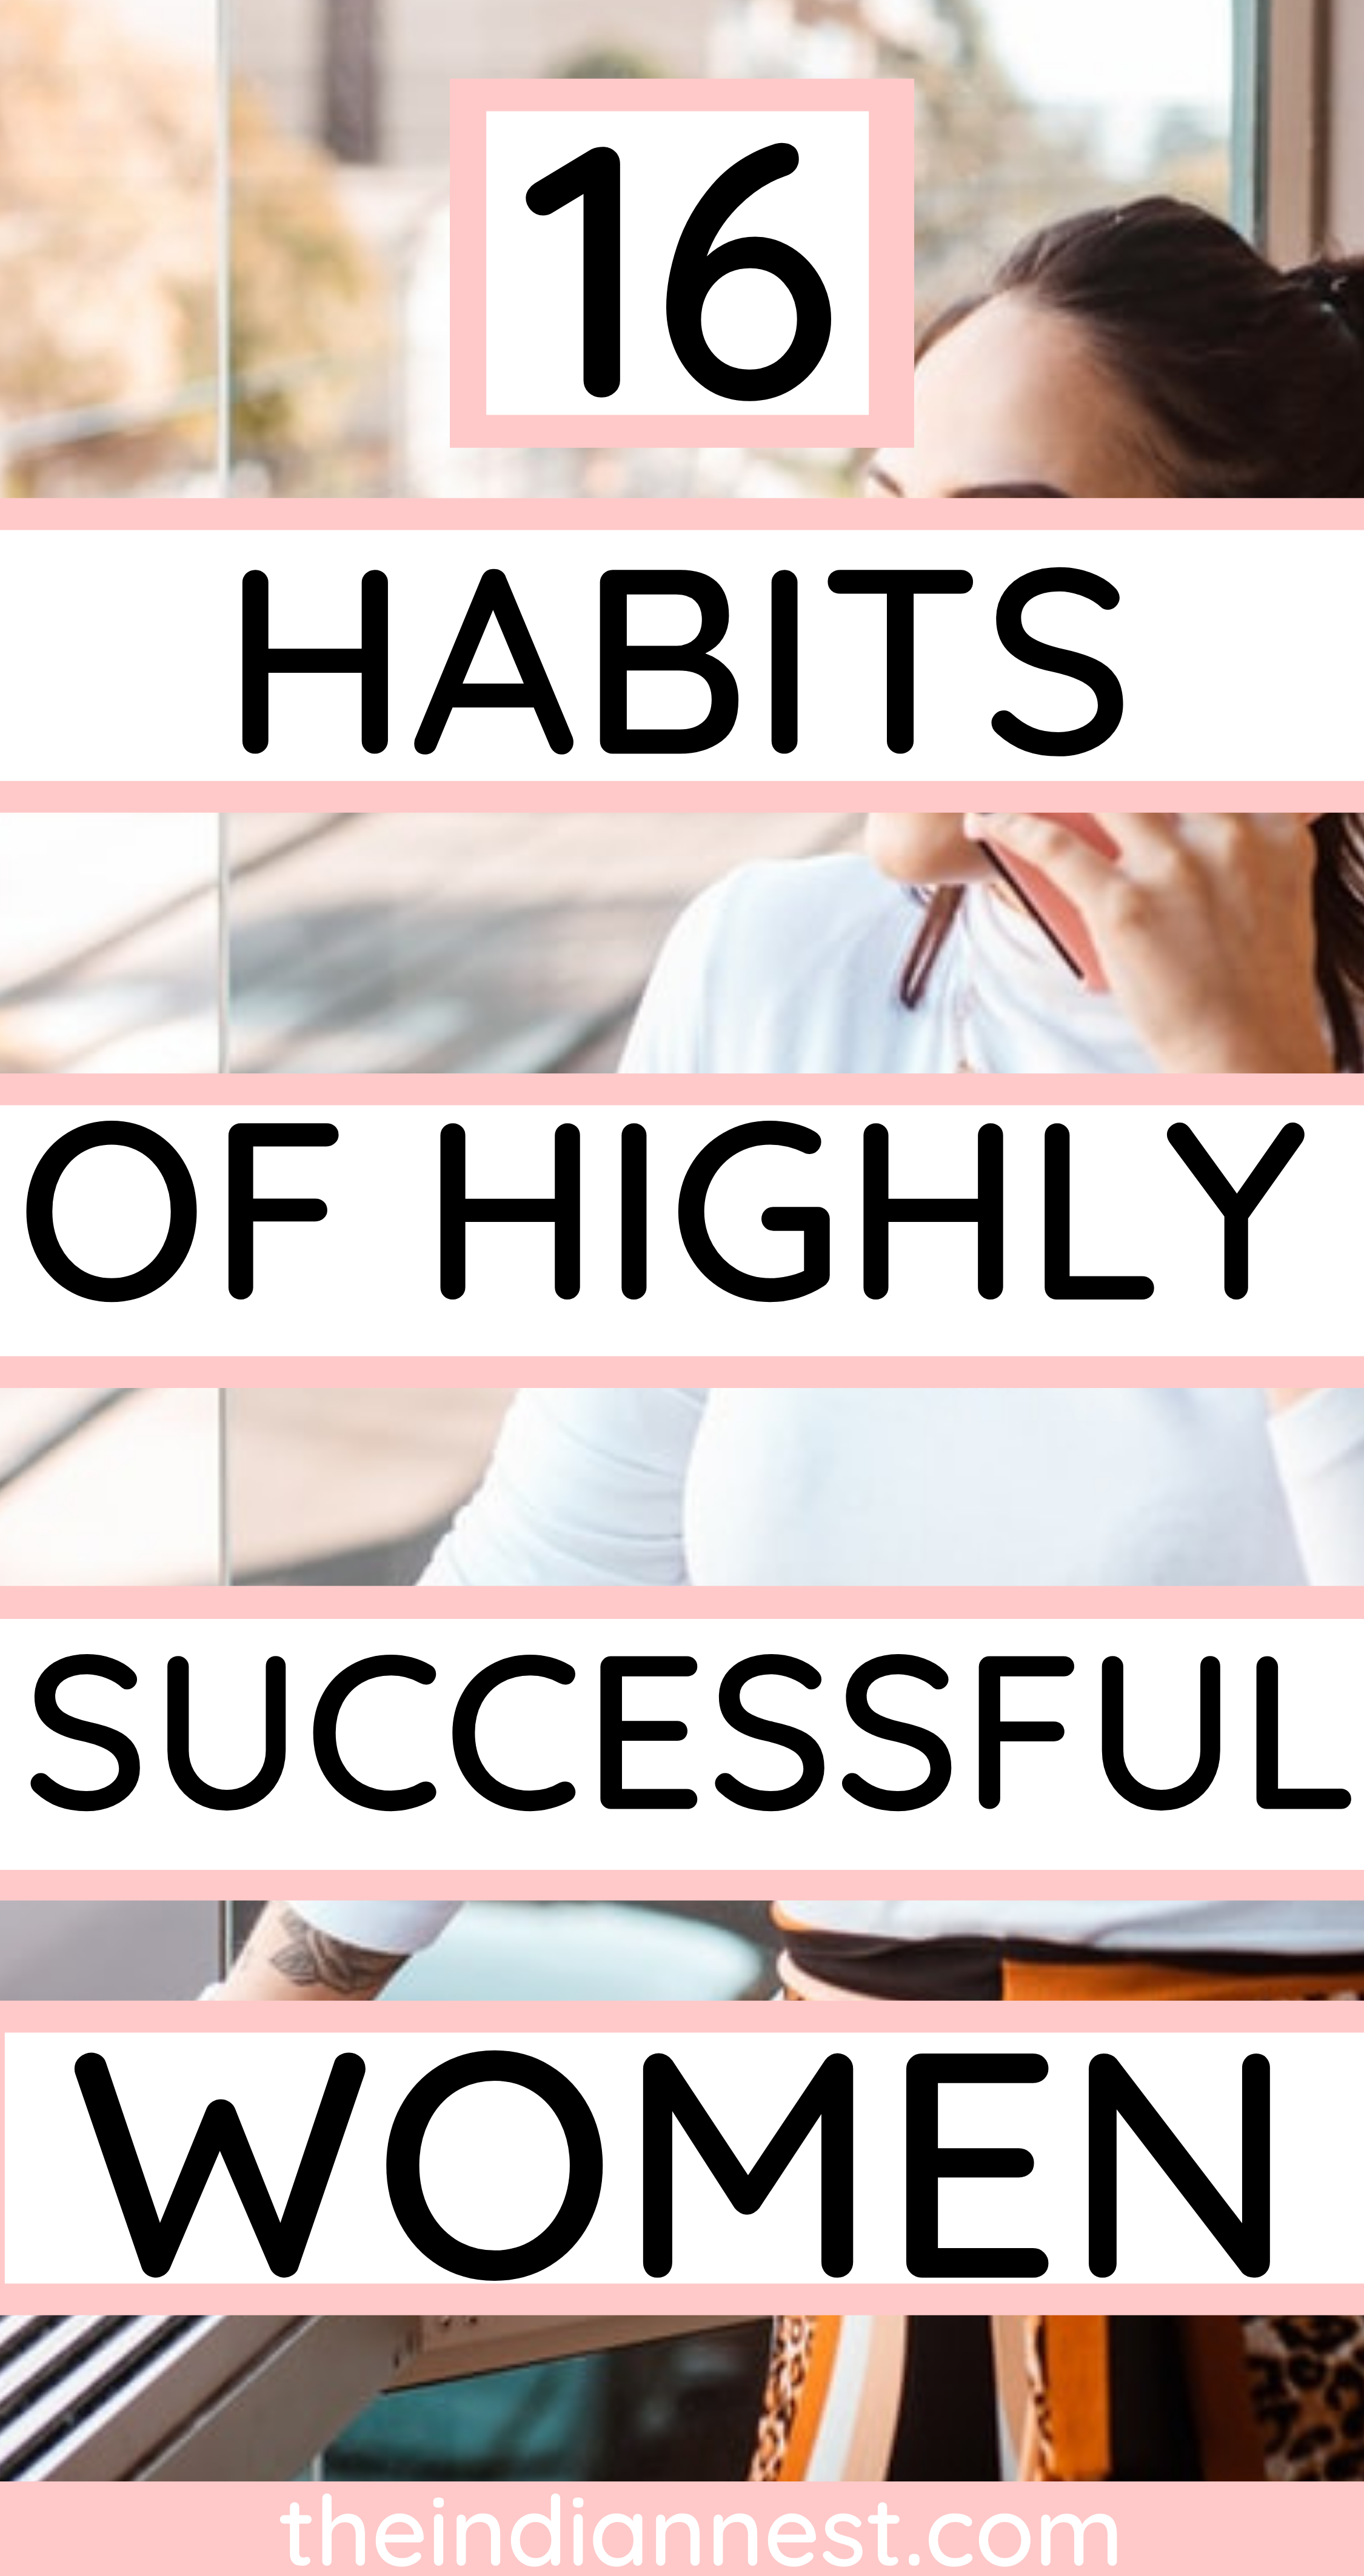 They have a habit of self-improvement and they do it every day. Successful women are clear about their goals. They believe they have a right to dream and achieve their goals. T